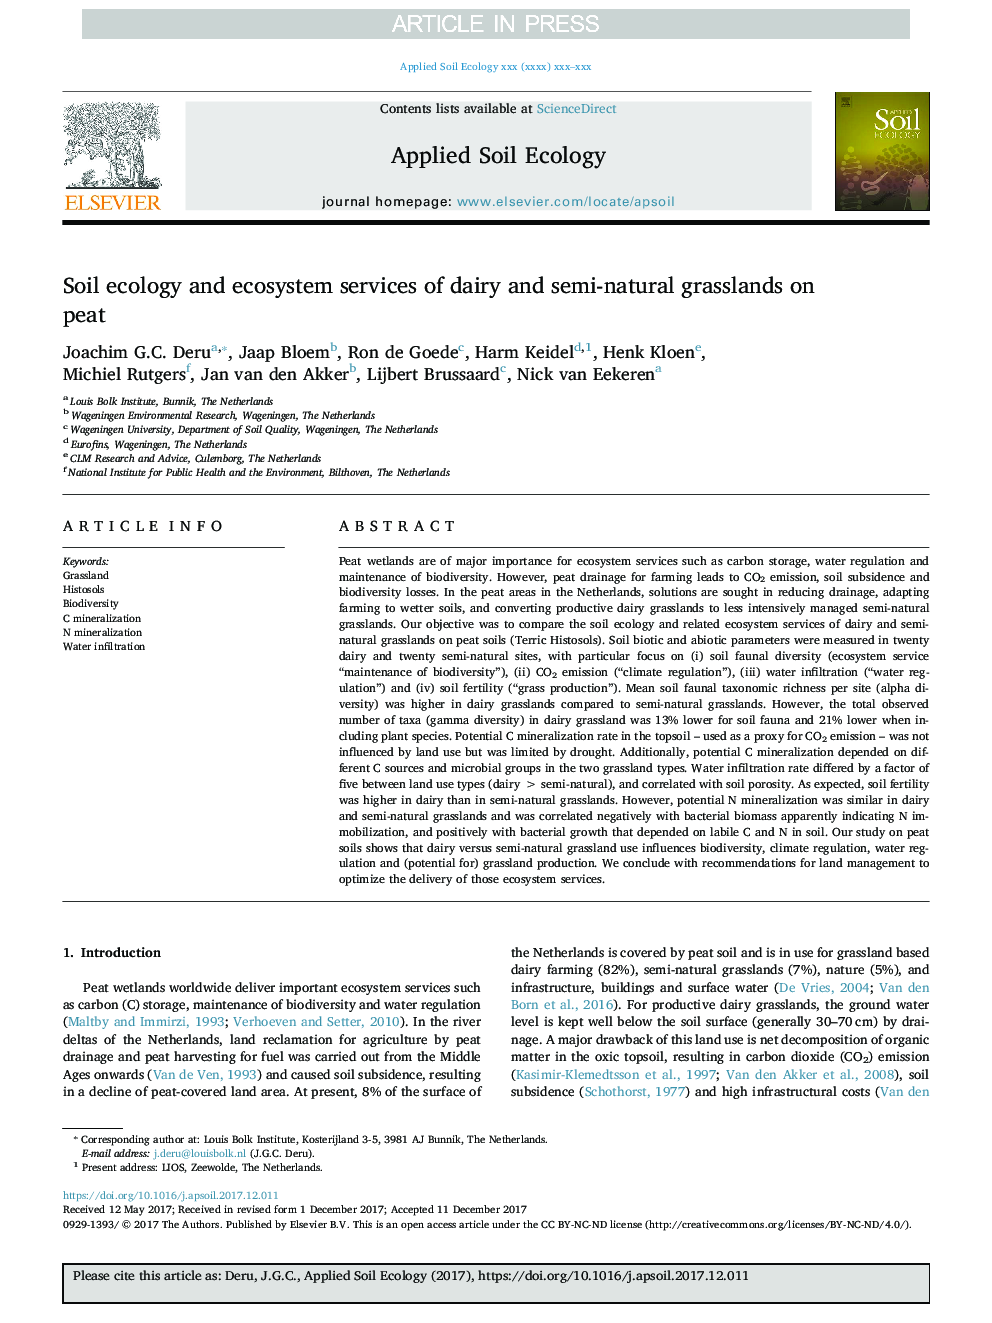 Soil ecology and ecosystem services of dairy and semi-natural grasslands on peat